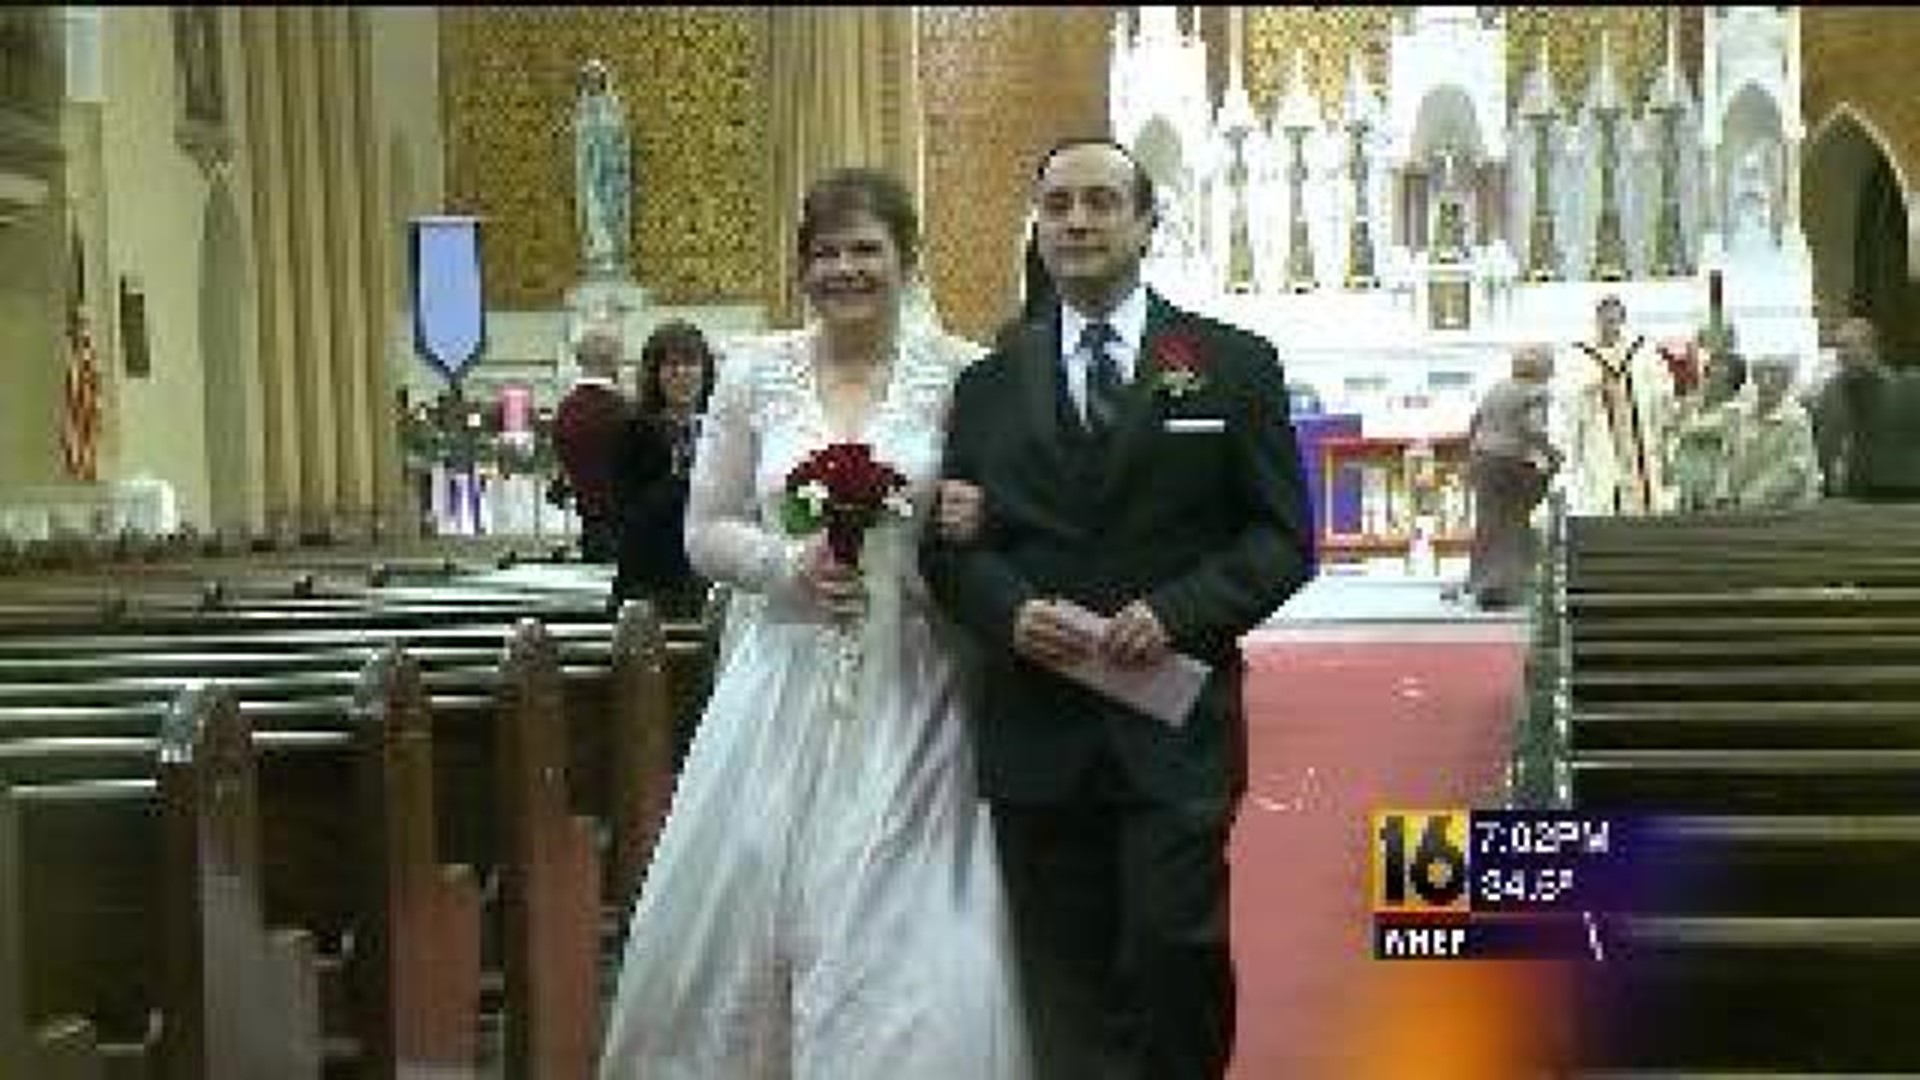 12/12/12: A Wedding Anniversary to Remember